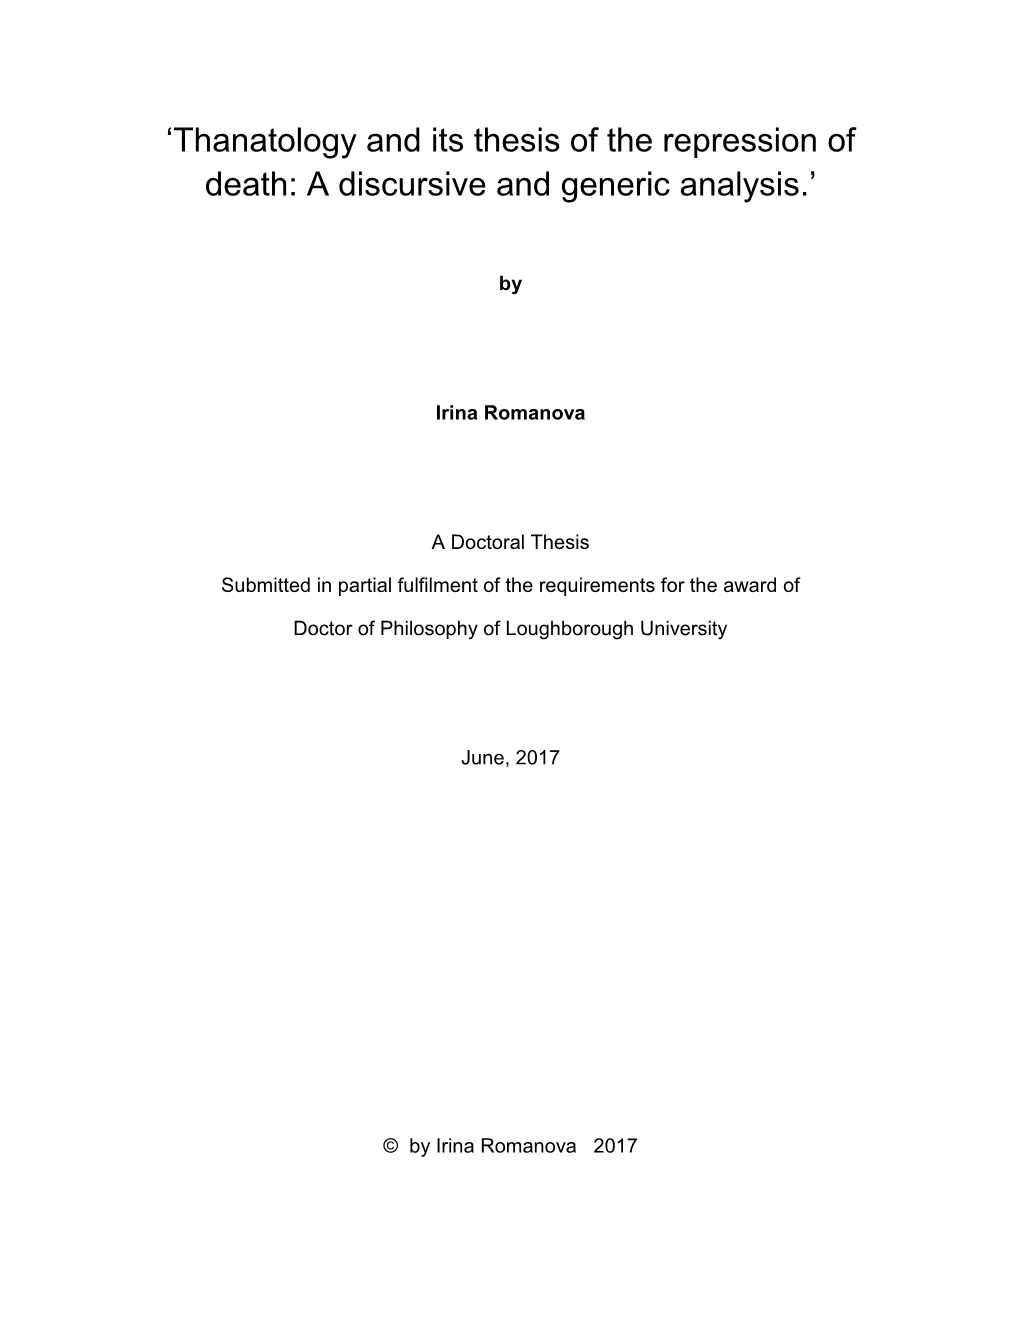 'Thanatology and Its Thesis of the Repression of Death: a Discursive